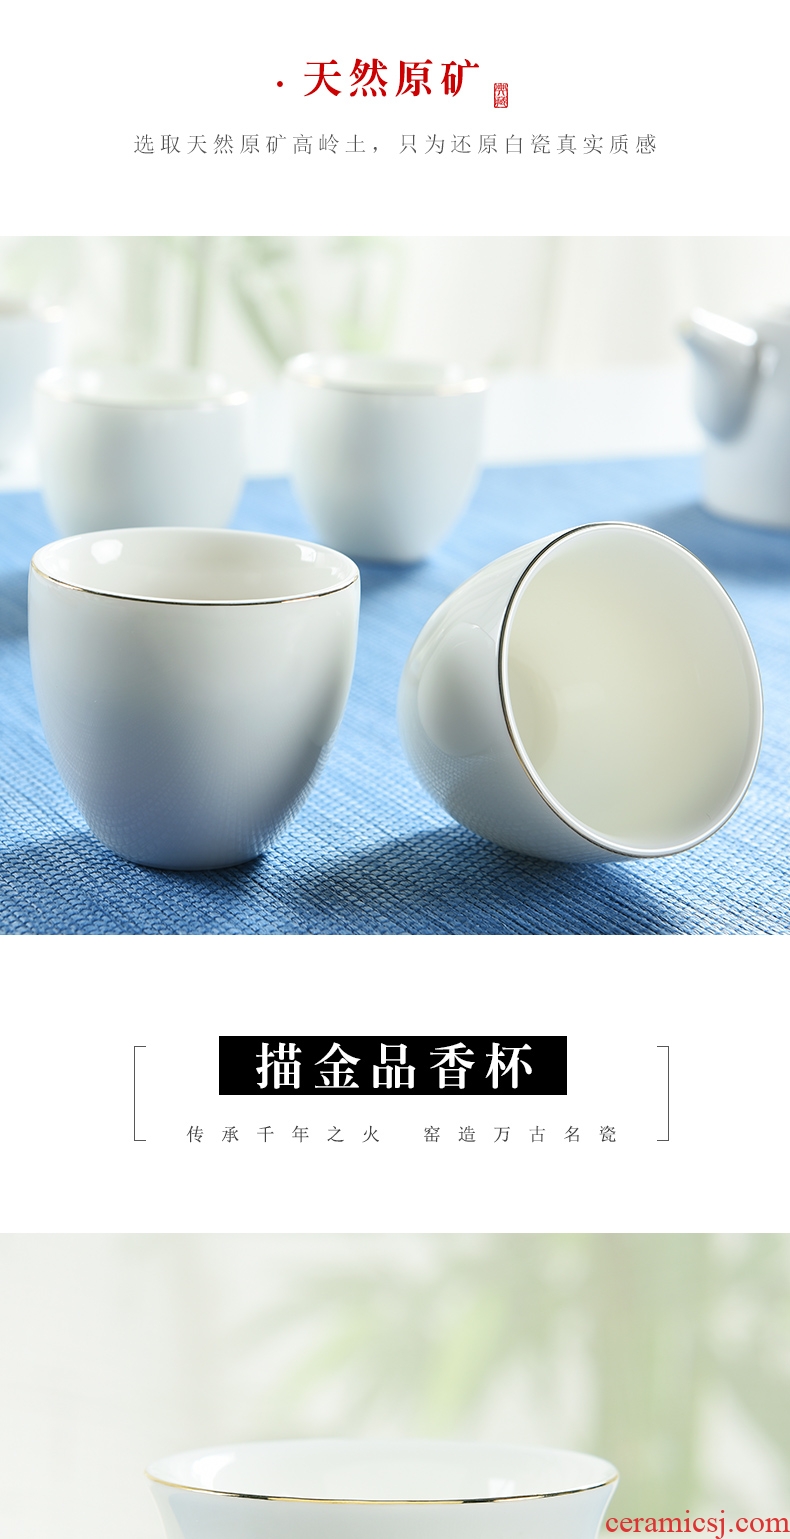 Ivory white porcelain god kung fu tea cups ceramic sample tea cup dehua white porcelain hat cup master cup single cup tea cups